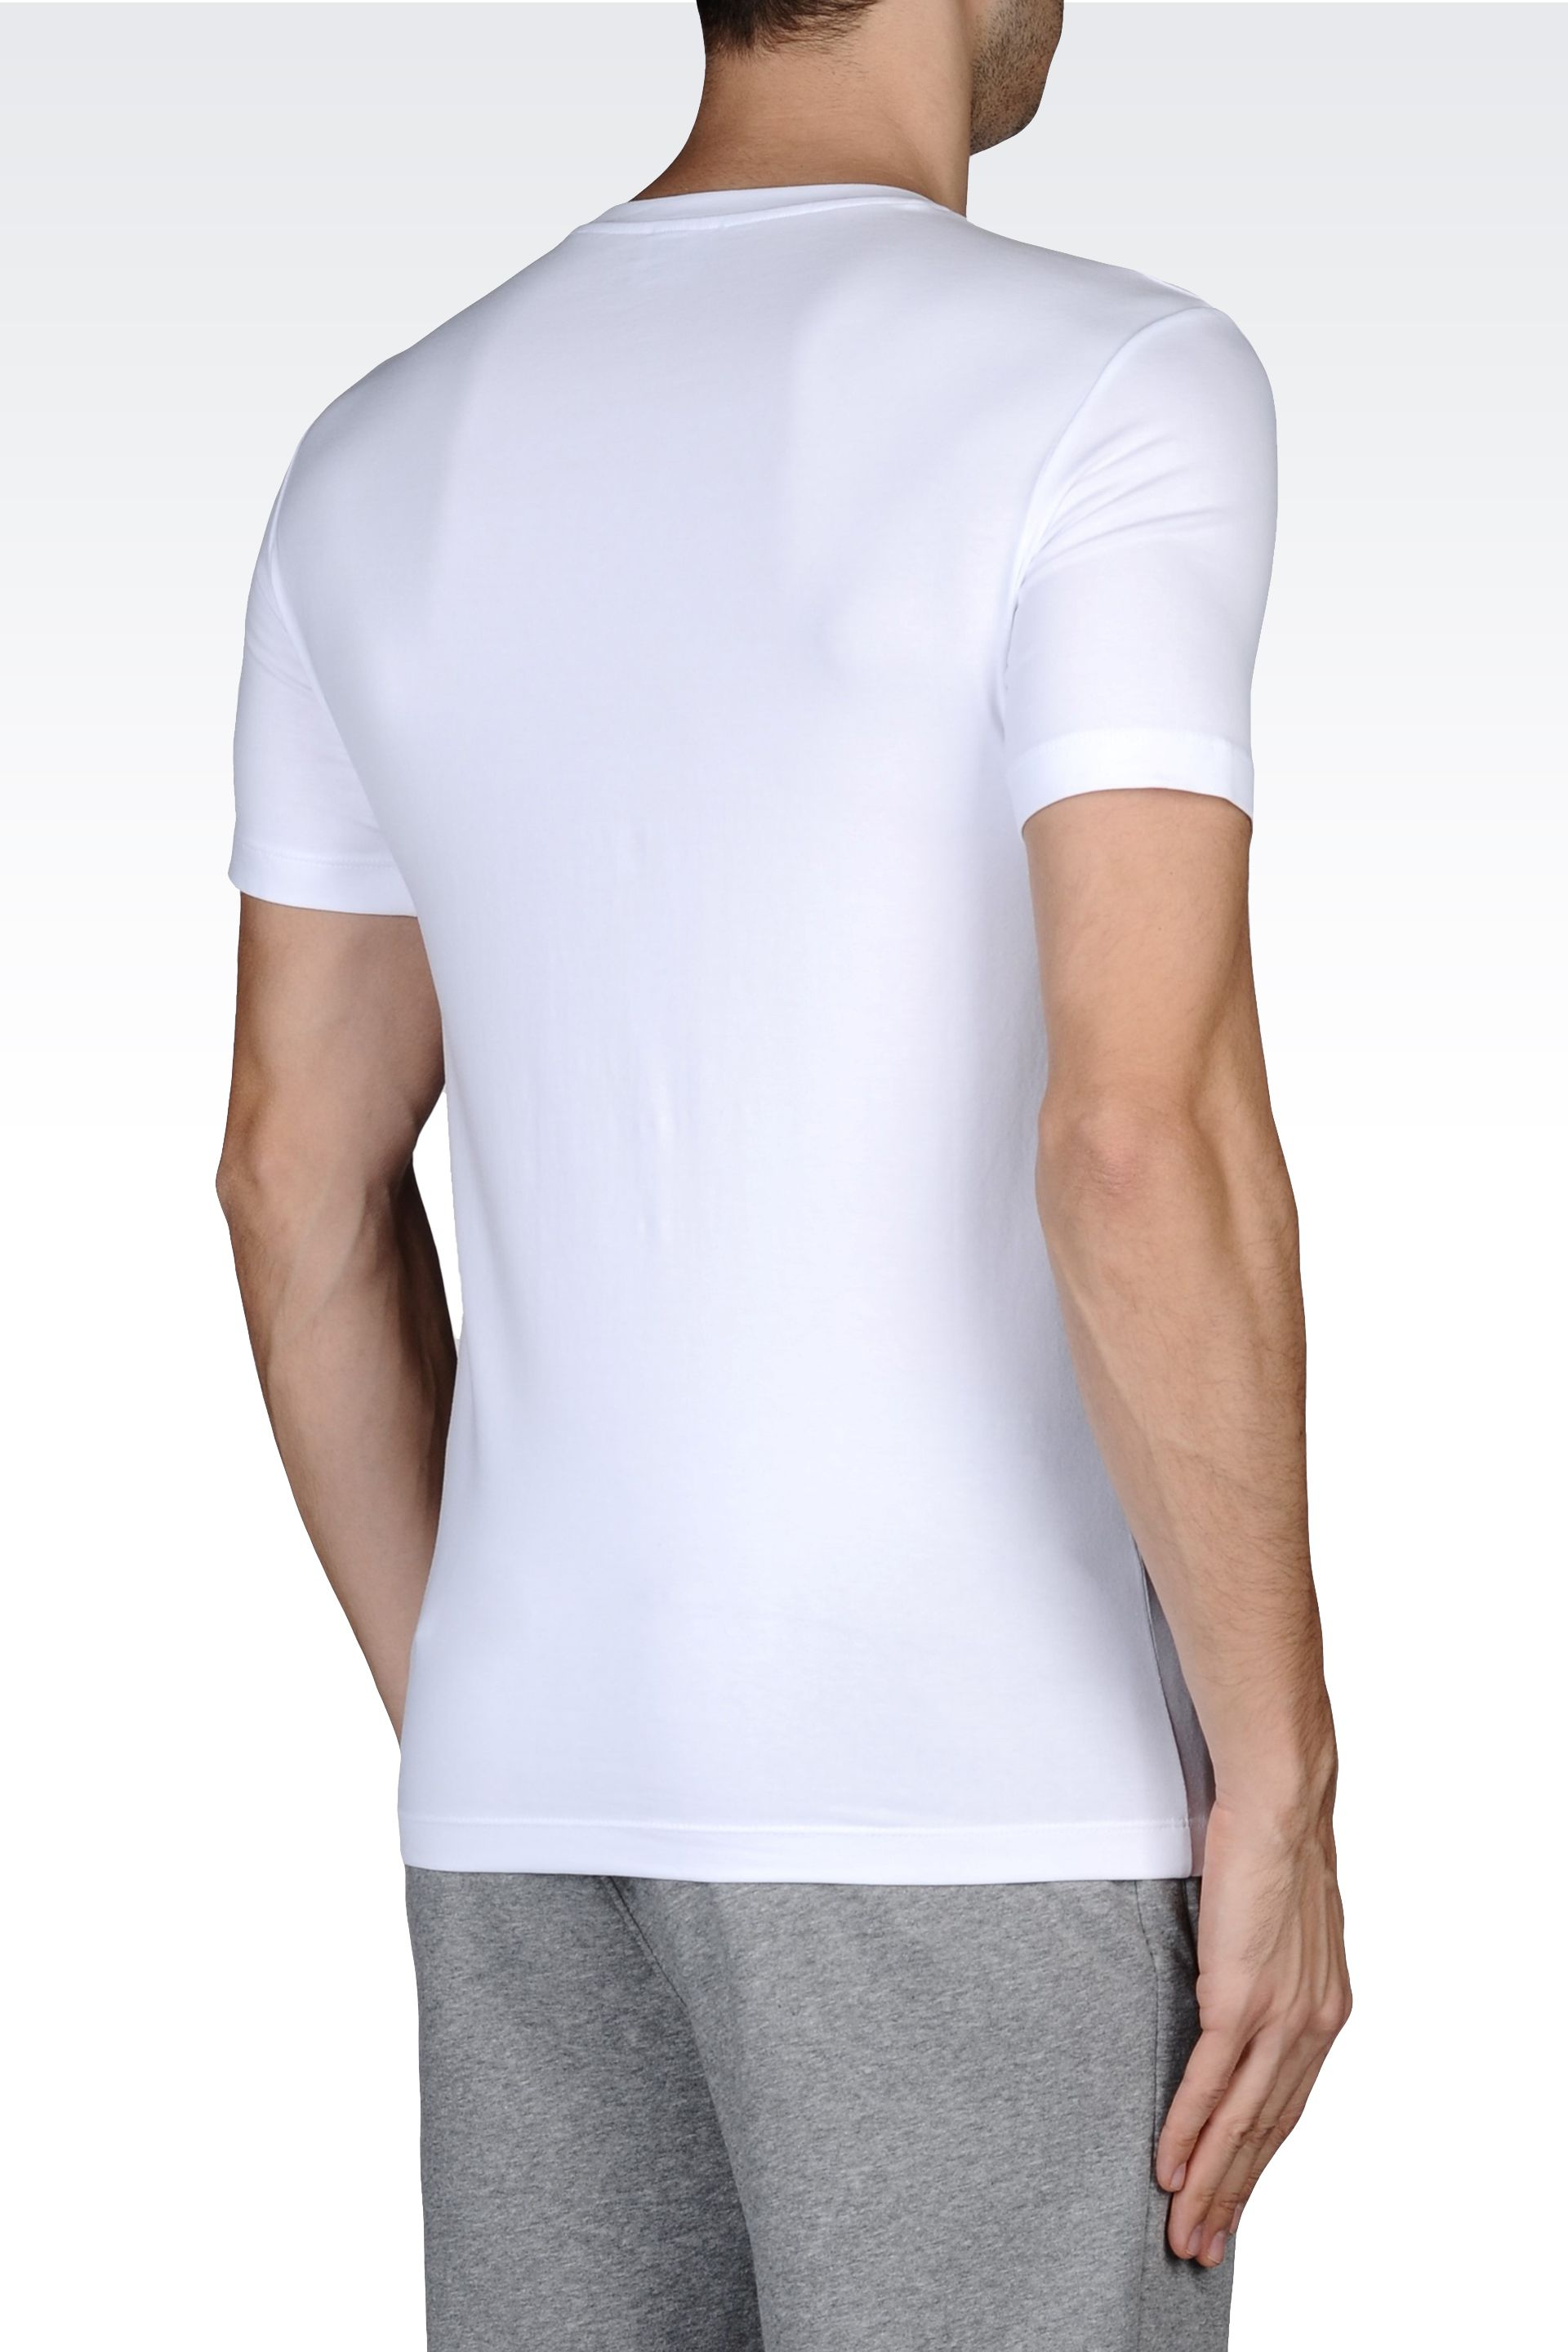 Ea7 T-Shirt In Stretch Cotton in White for Men | Lyst